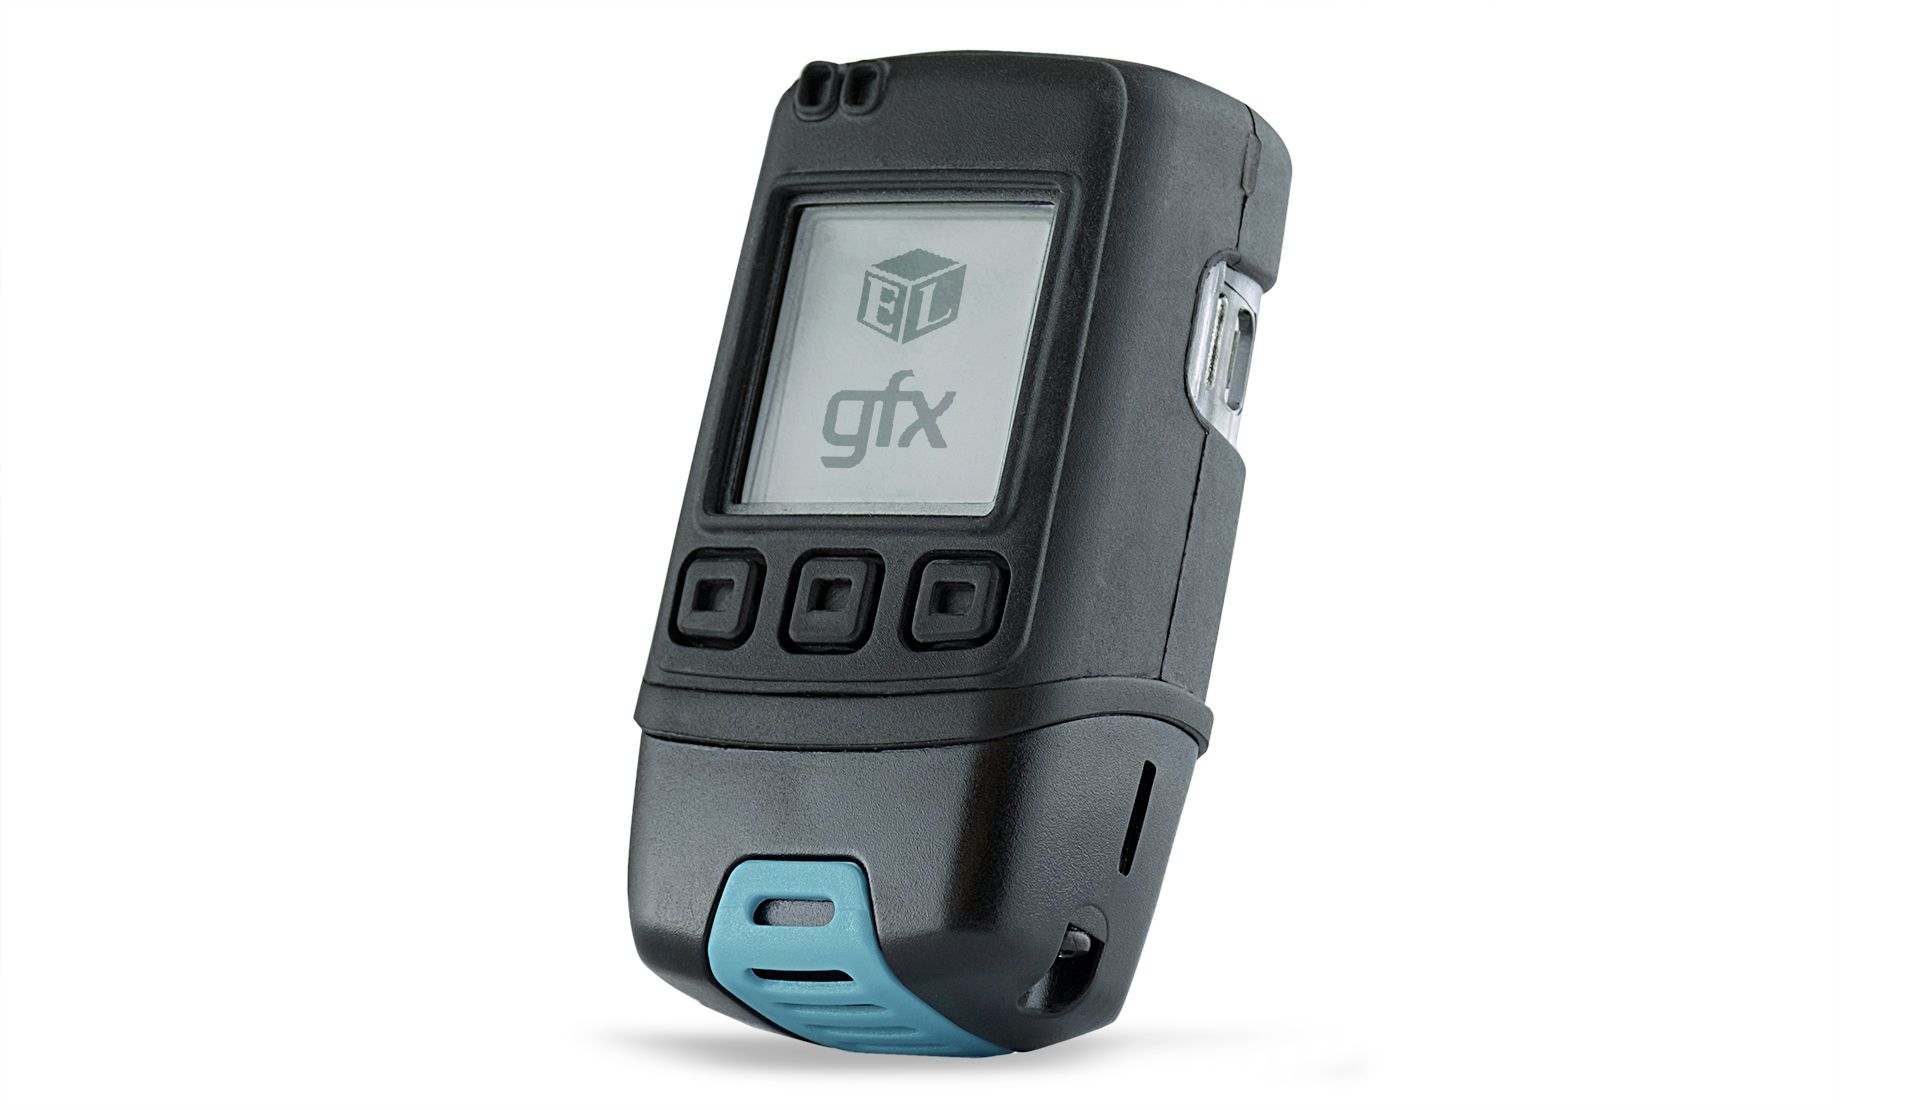 Lascar EL-GFX-2 Temperature & Humidity Data Logger, 1 Input Channel(s), Battery-Powered